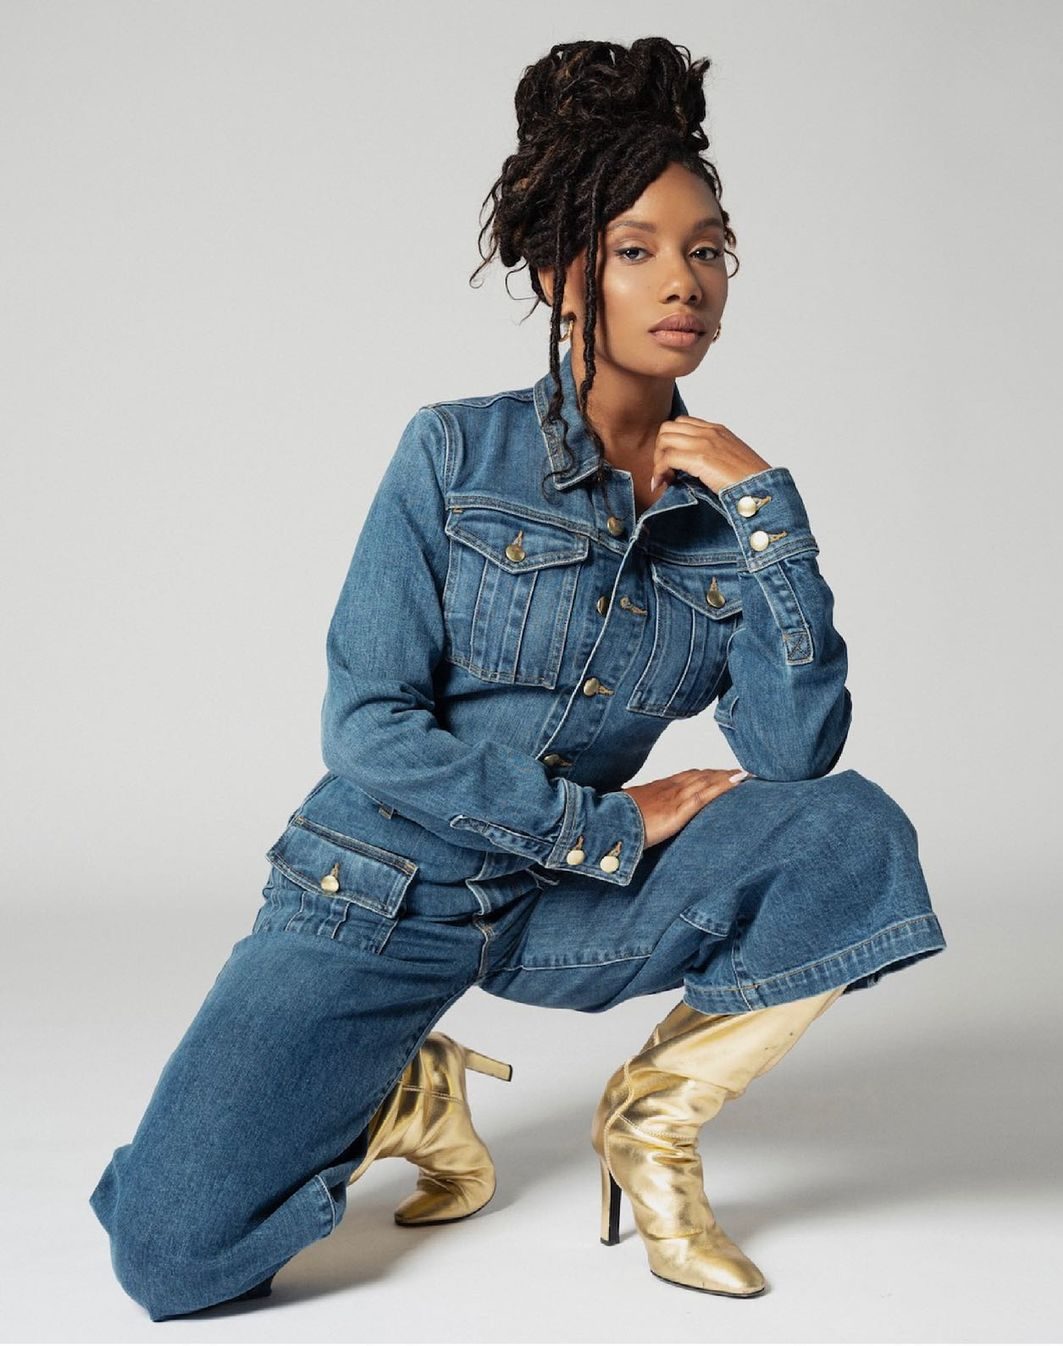 Imani Hakim's Stunning Look In Denim Co-ord Set With Golden Boot